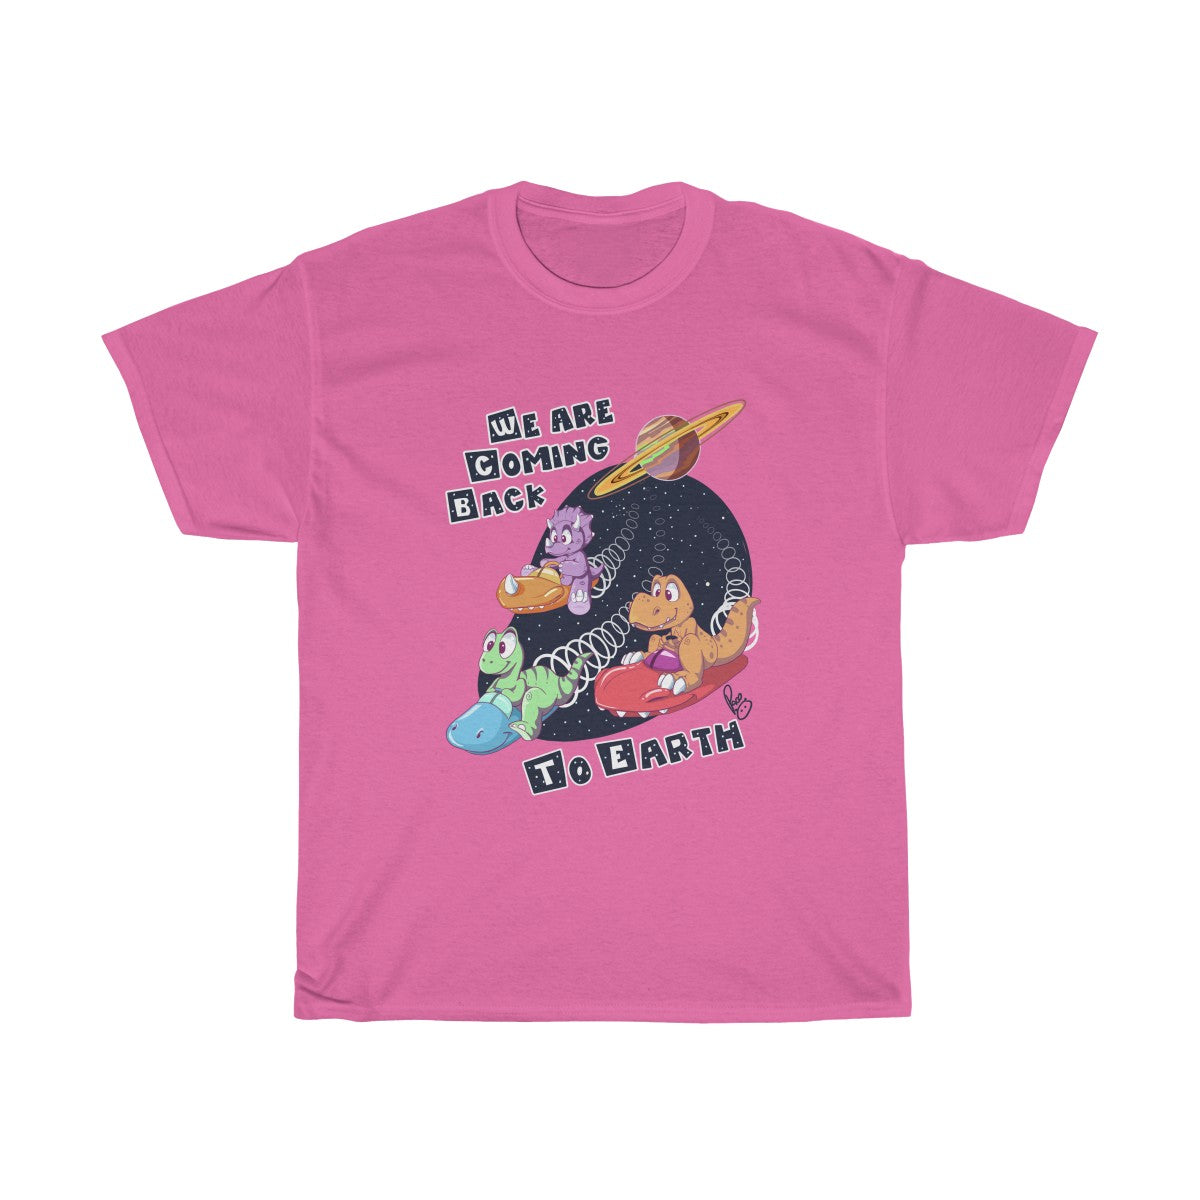 We are coming back to Earth - T-Shirt T-Shirt Paco Panda Pink S 